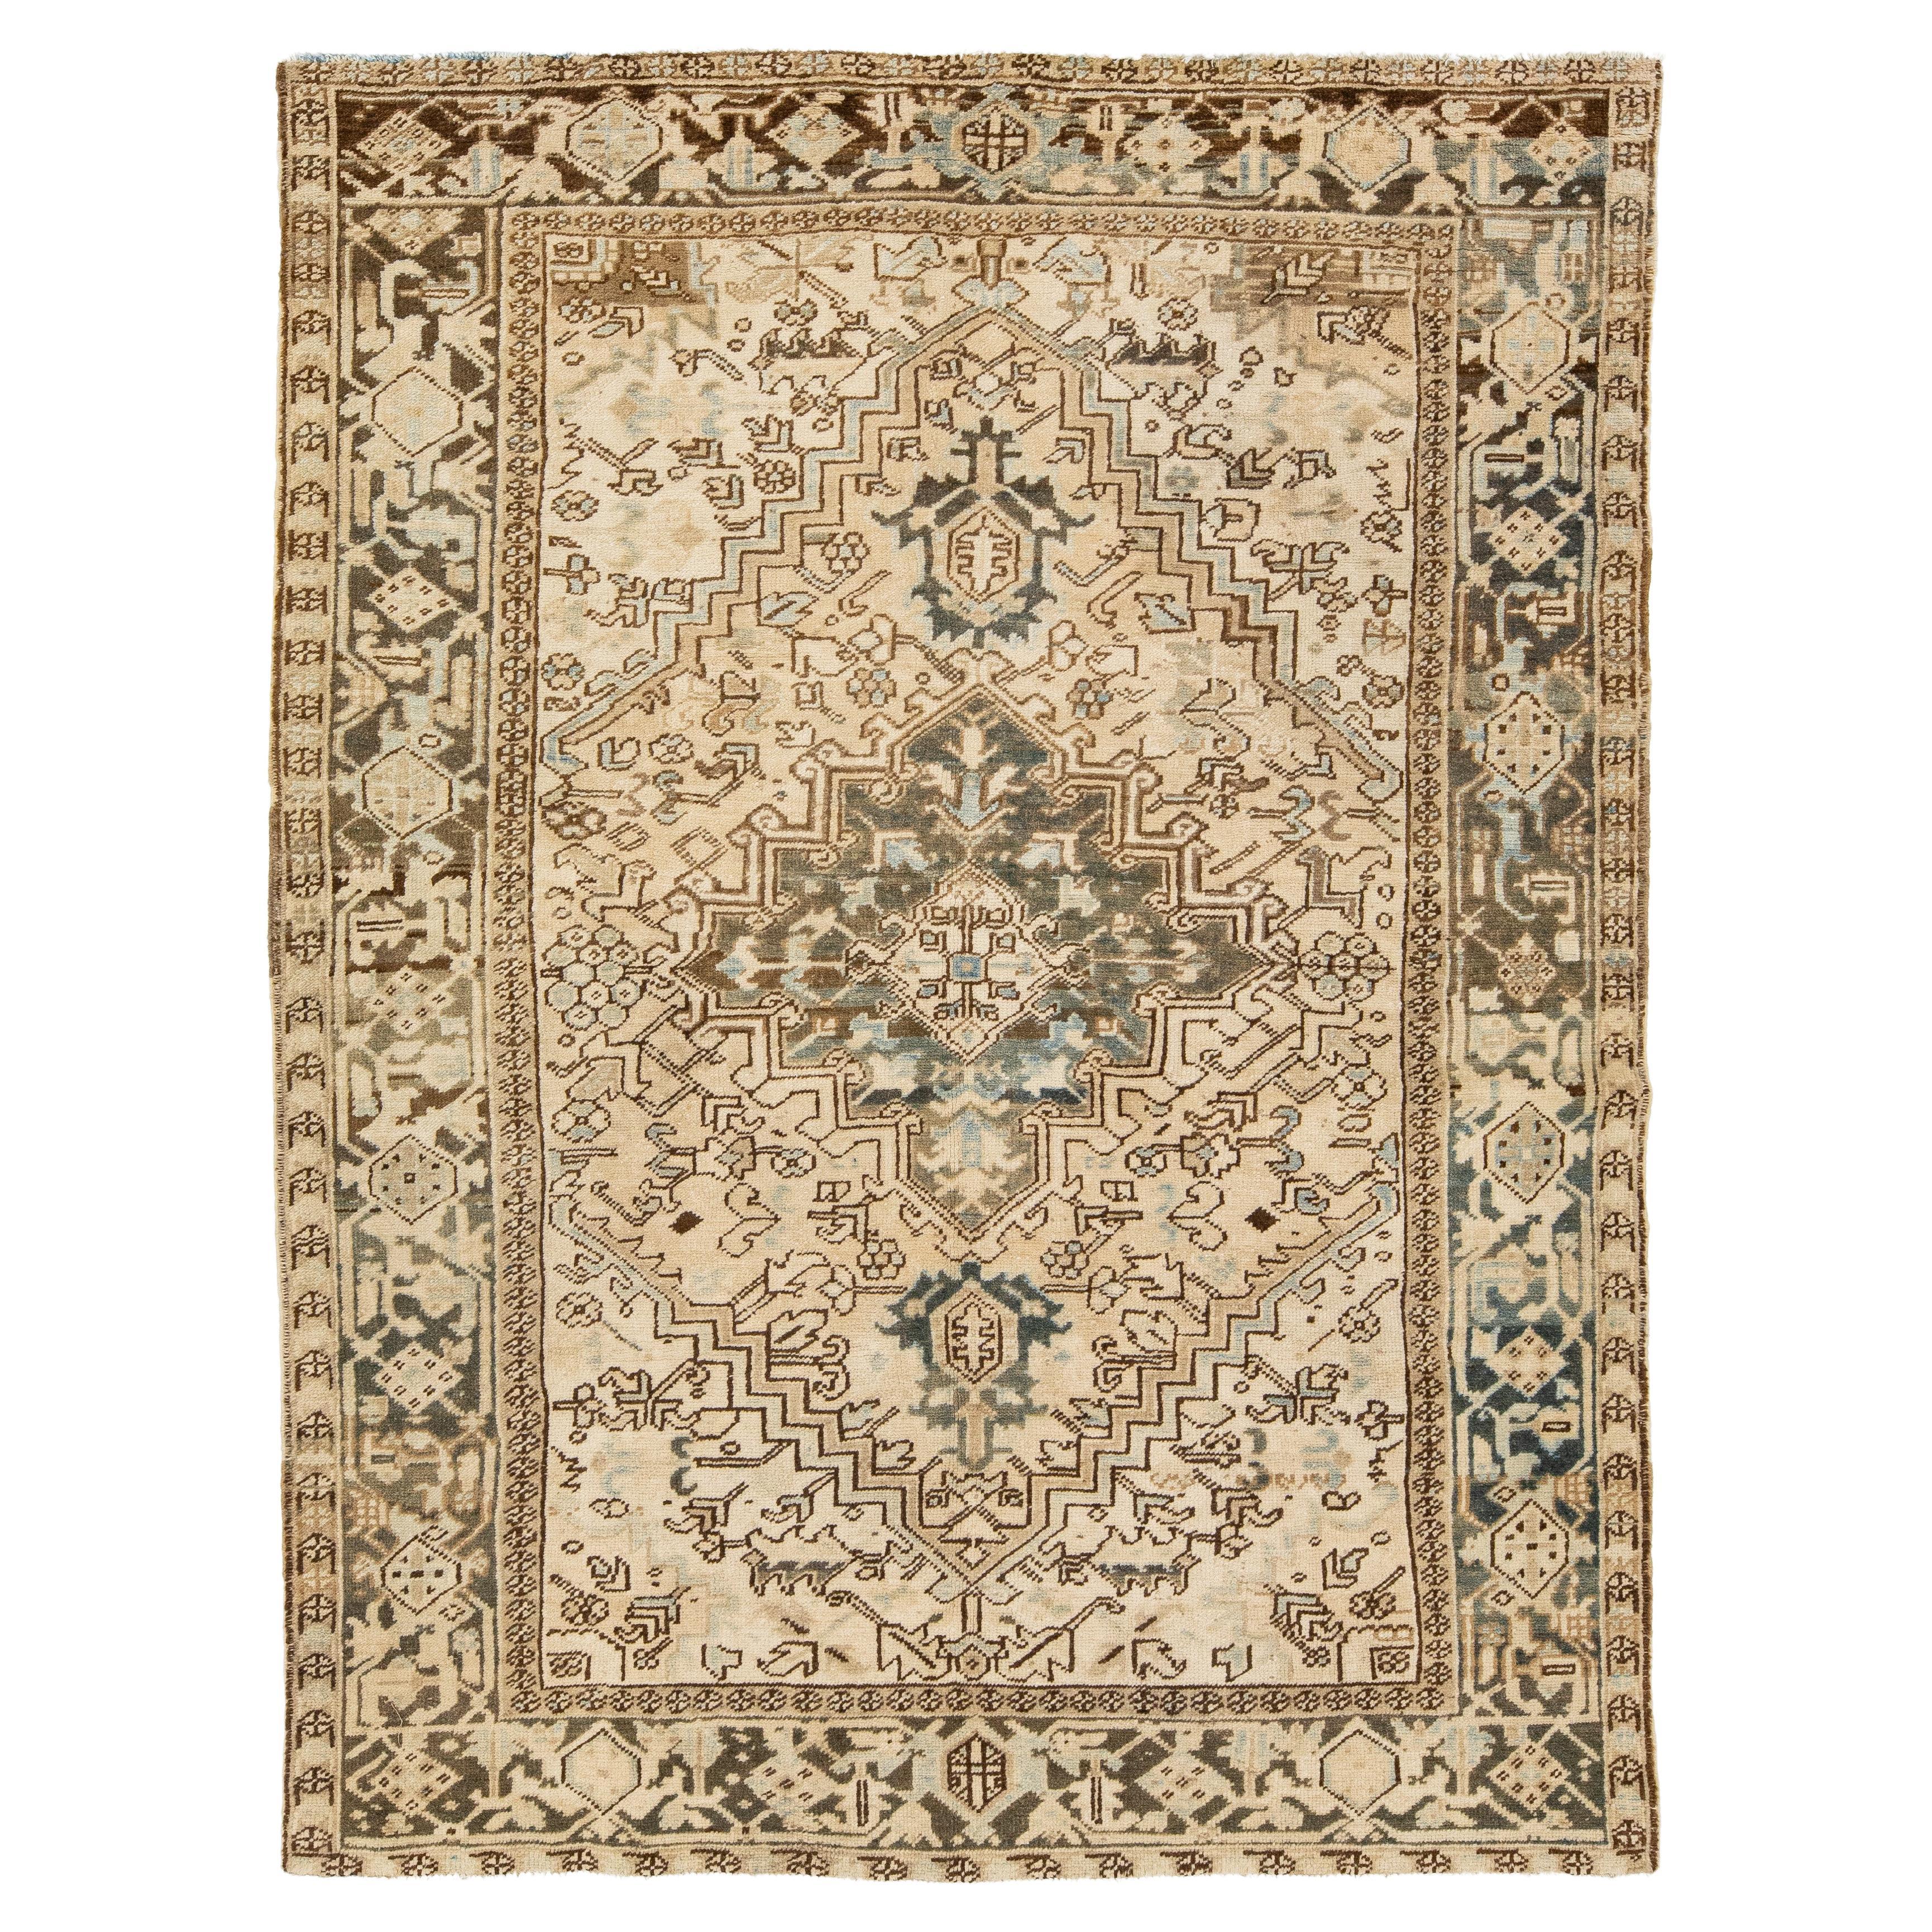 1920s Persian Antique Wool Rug In Beige with Medallion Design  For Sale